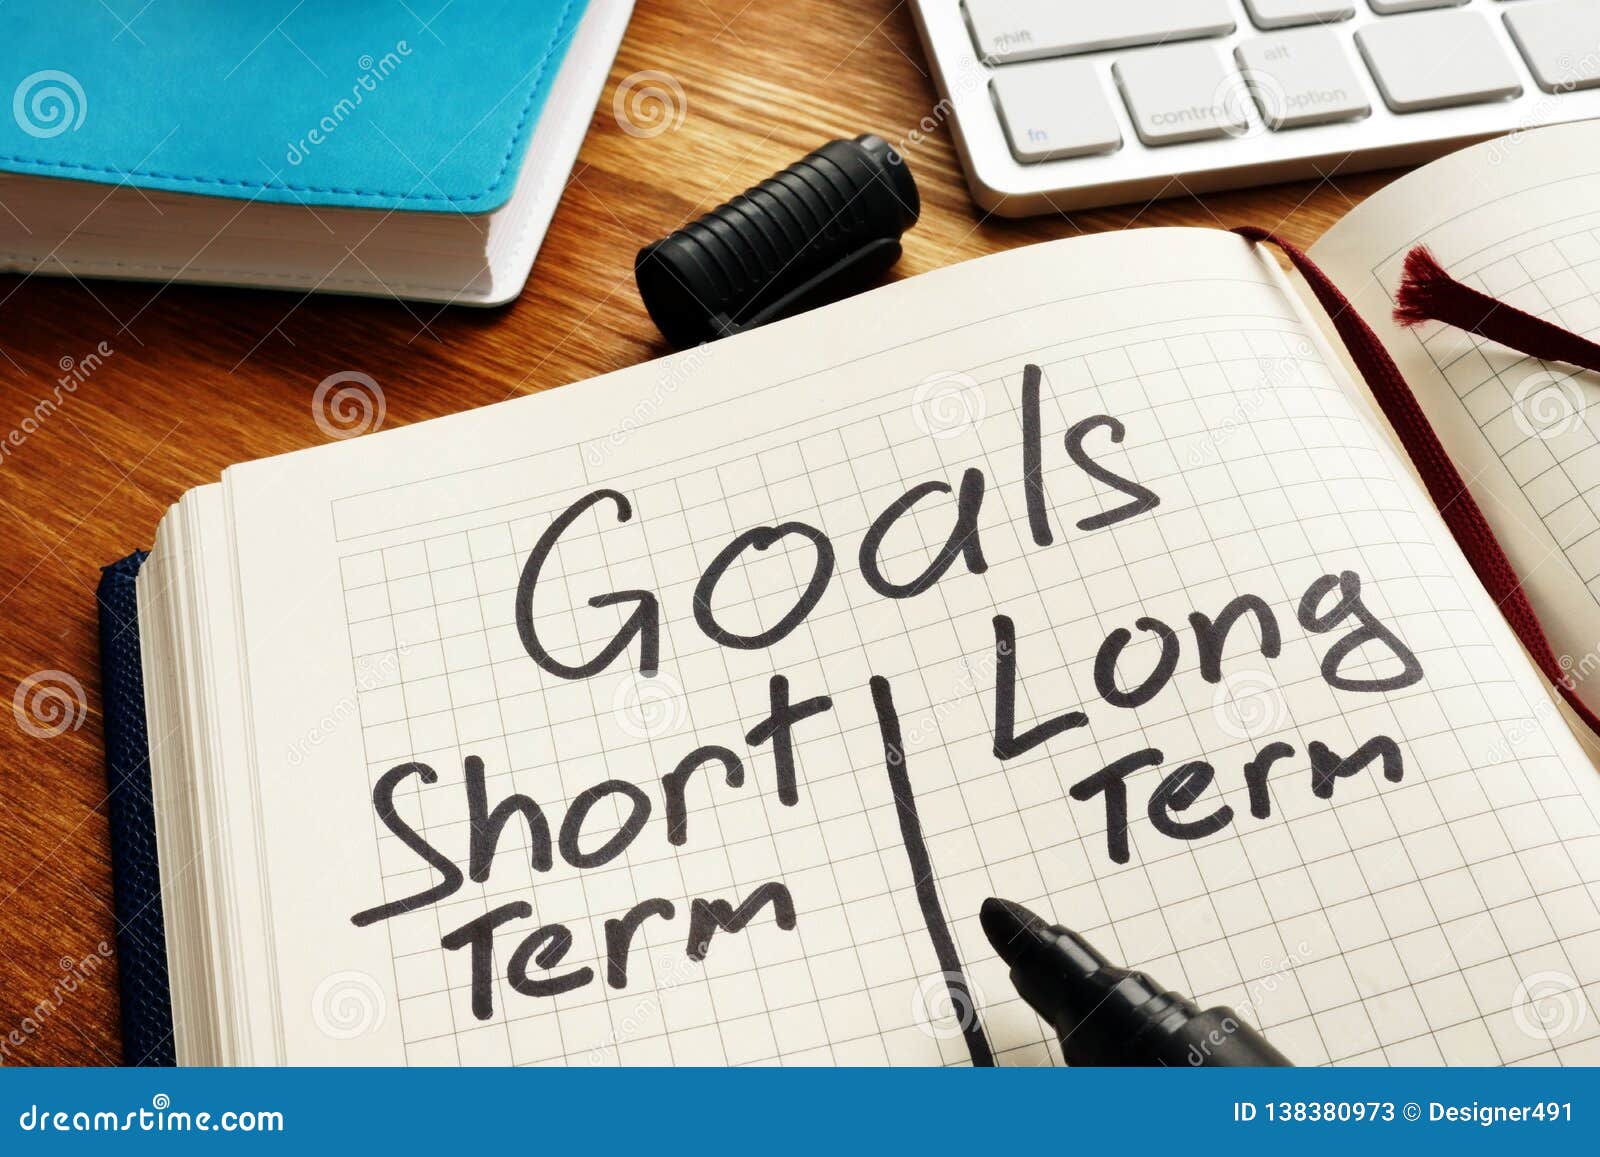 list of goals with short term and long term